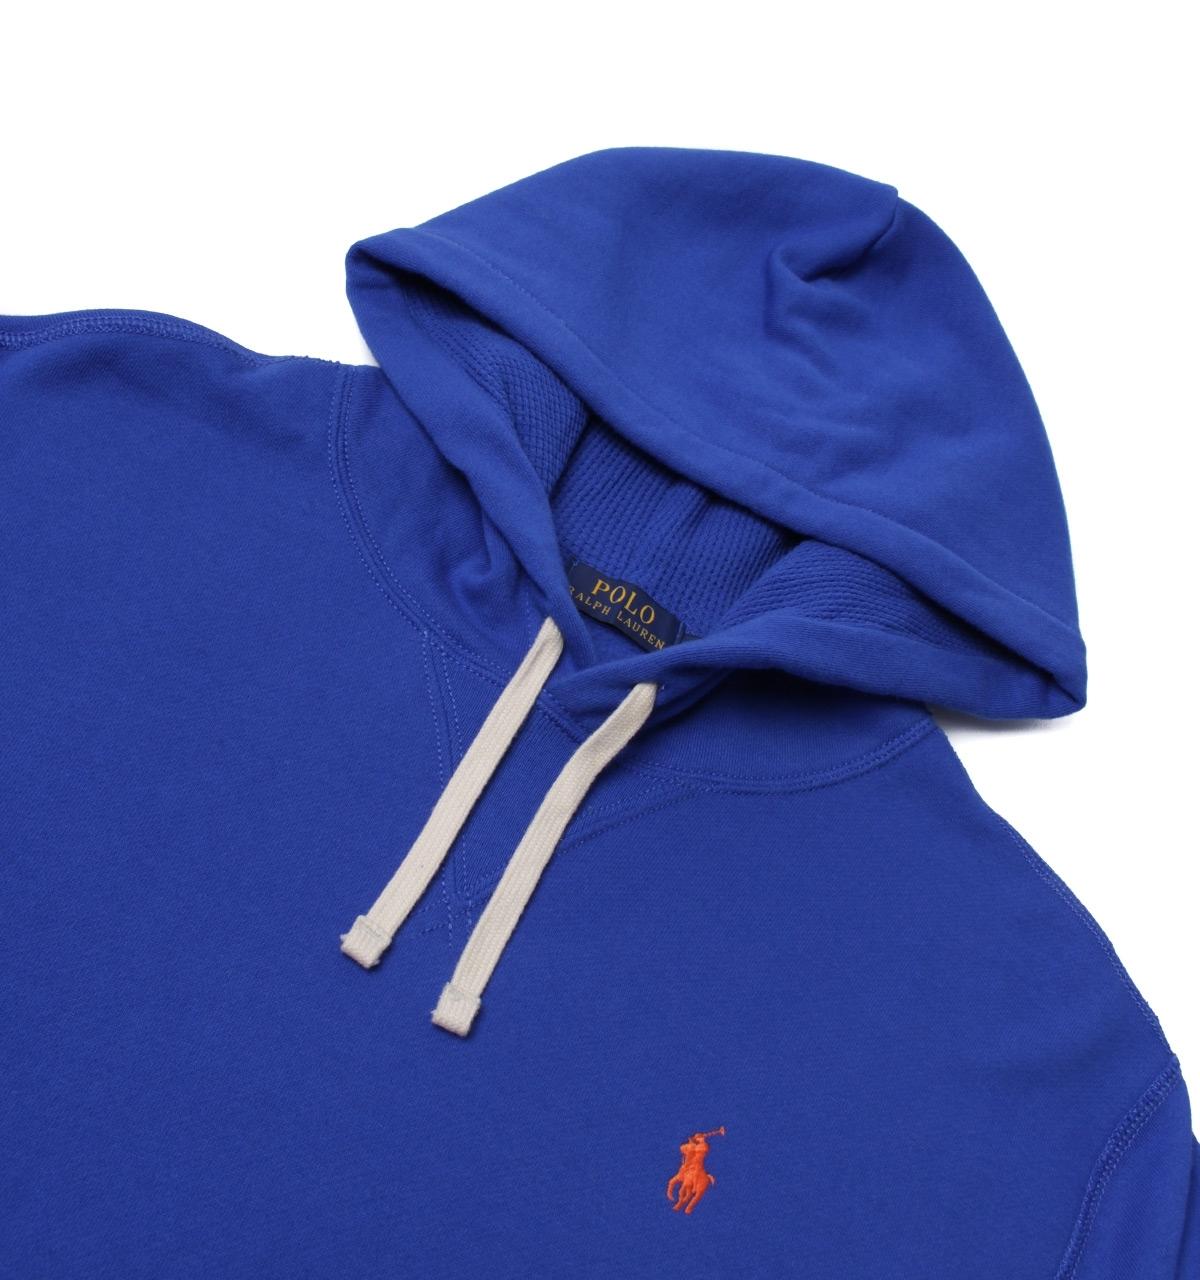 Polo Ralph Lauren Cotton Royal Blue Pullover Hoodie for Men - Lyst